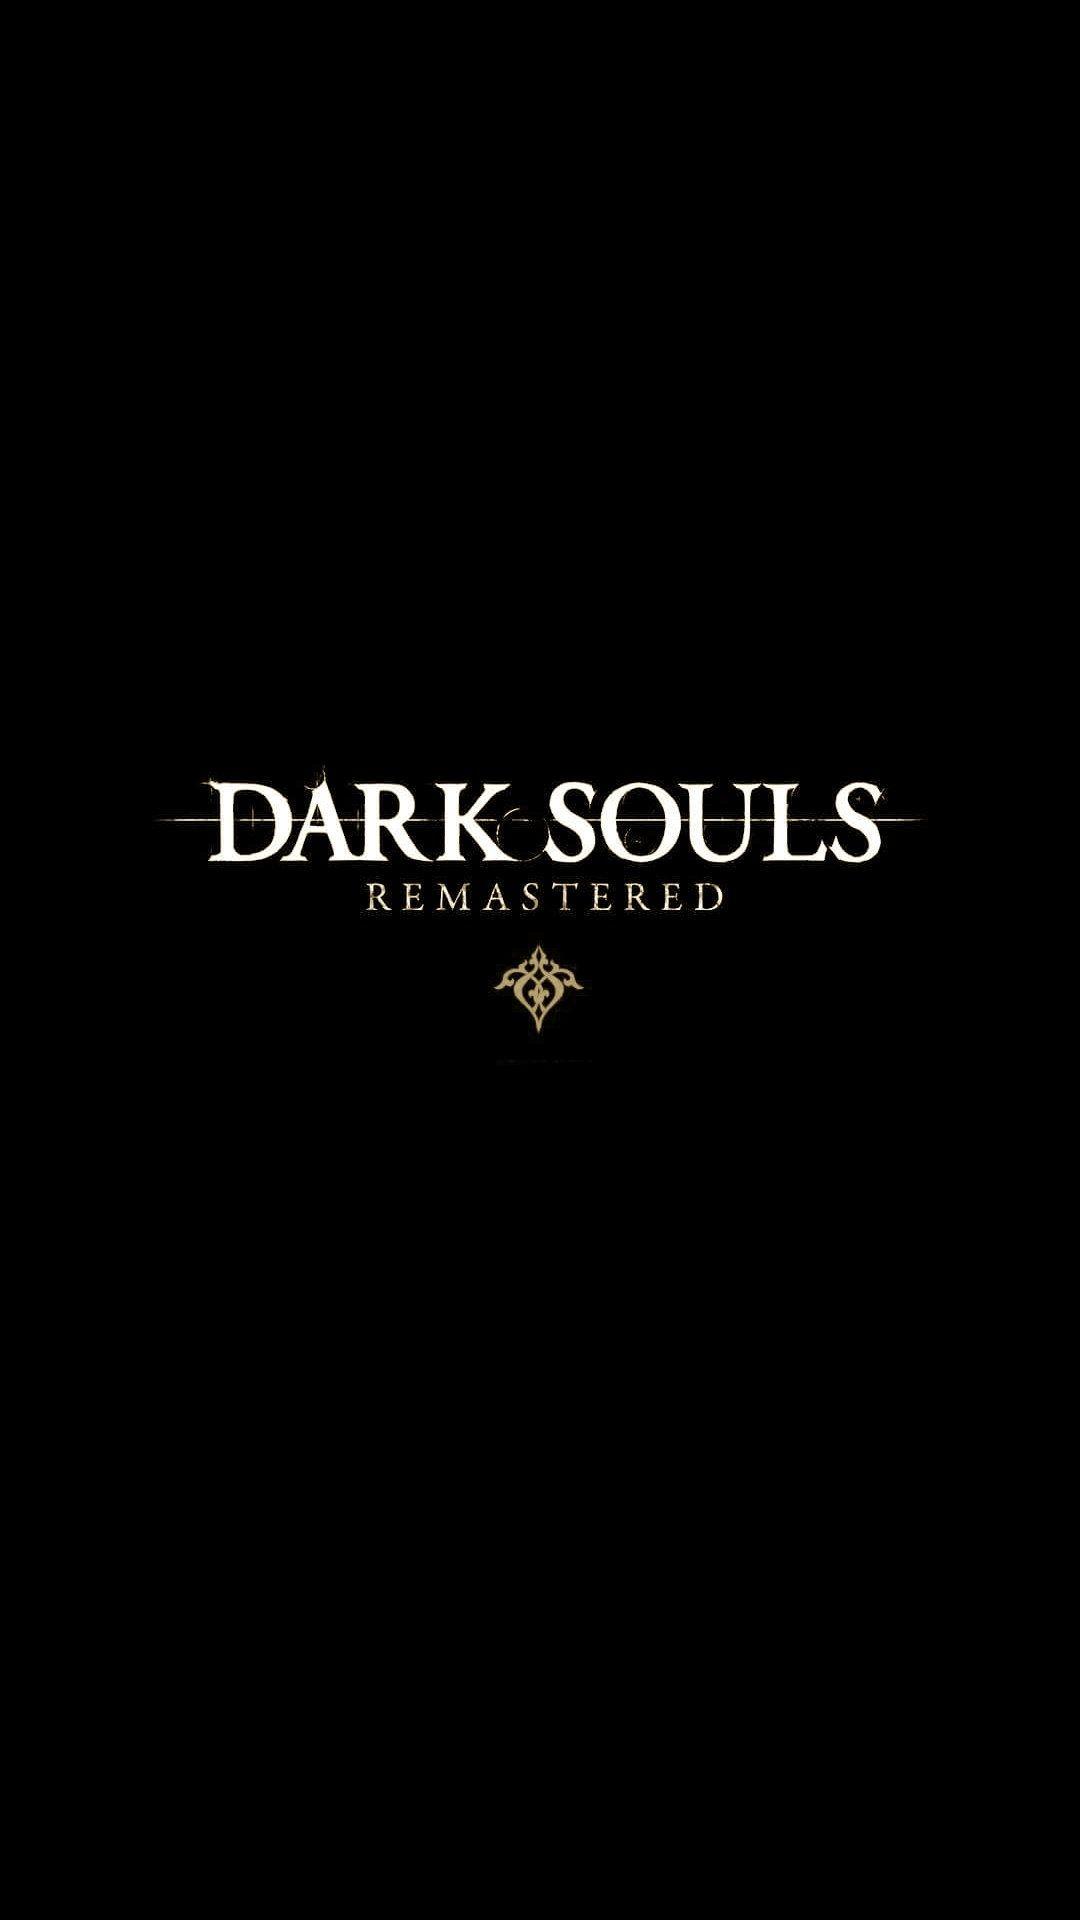 Simple wallpaper for anyone that's excited for the Dark Souls